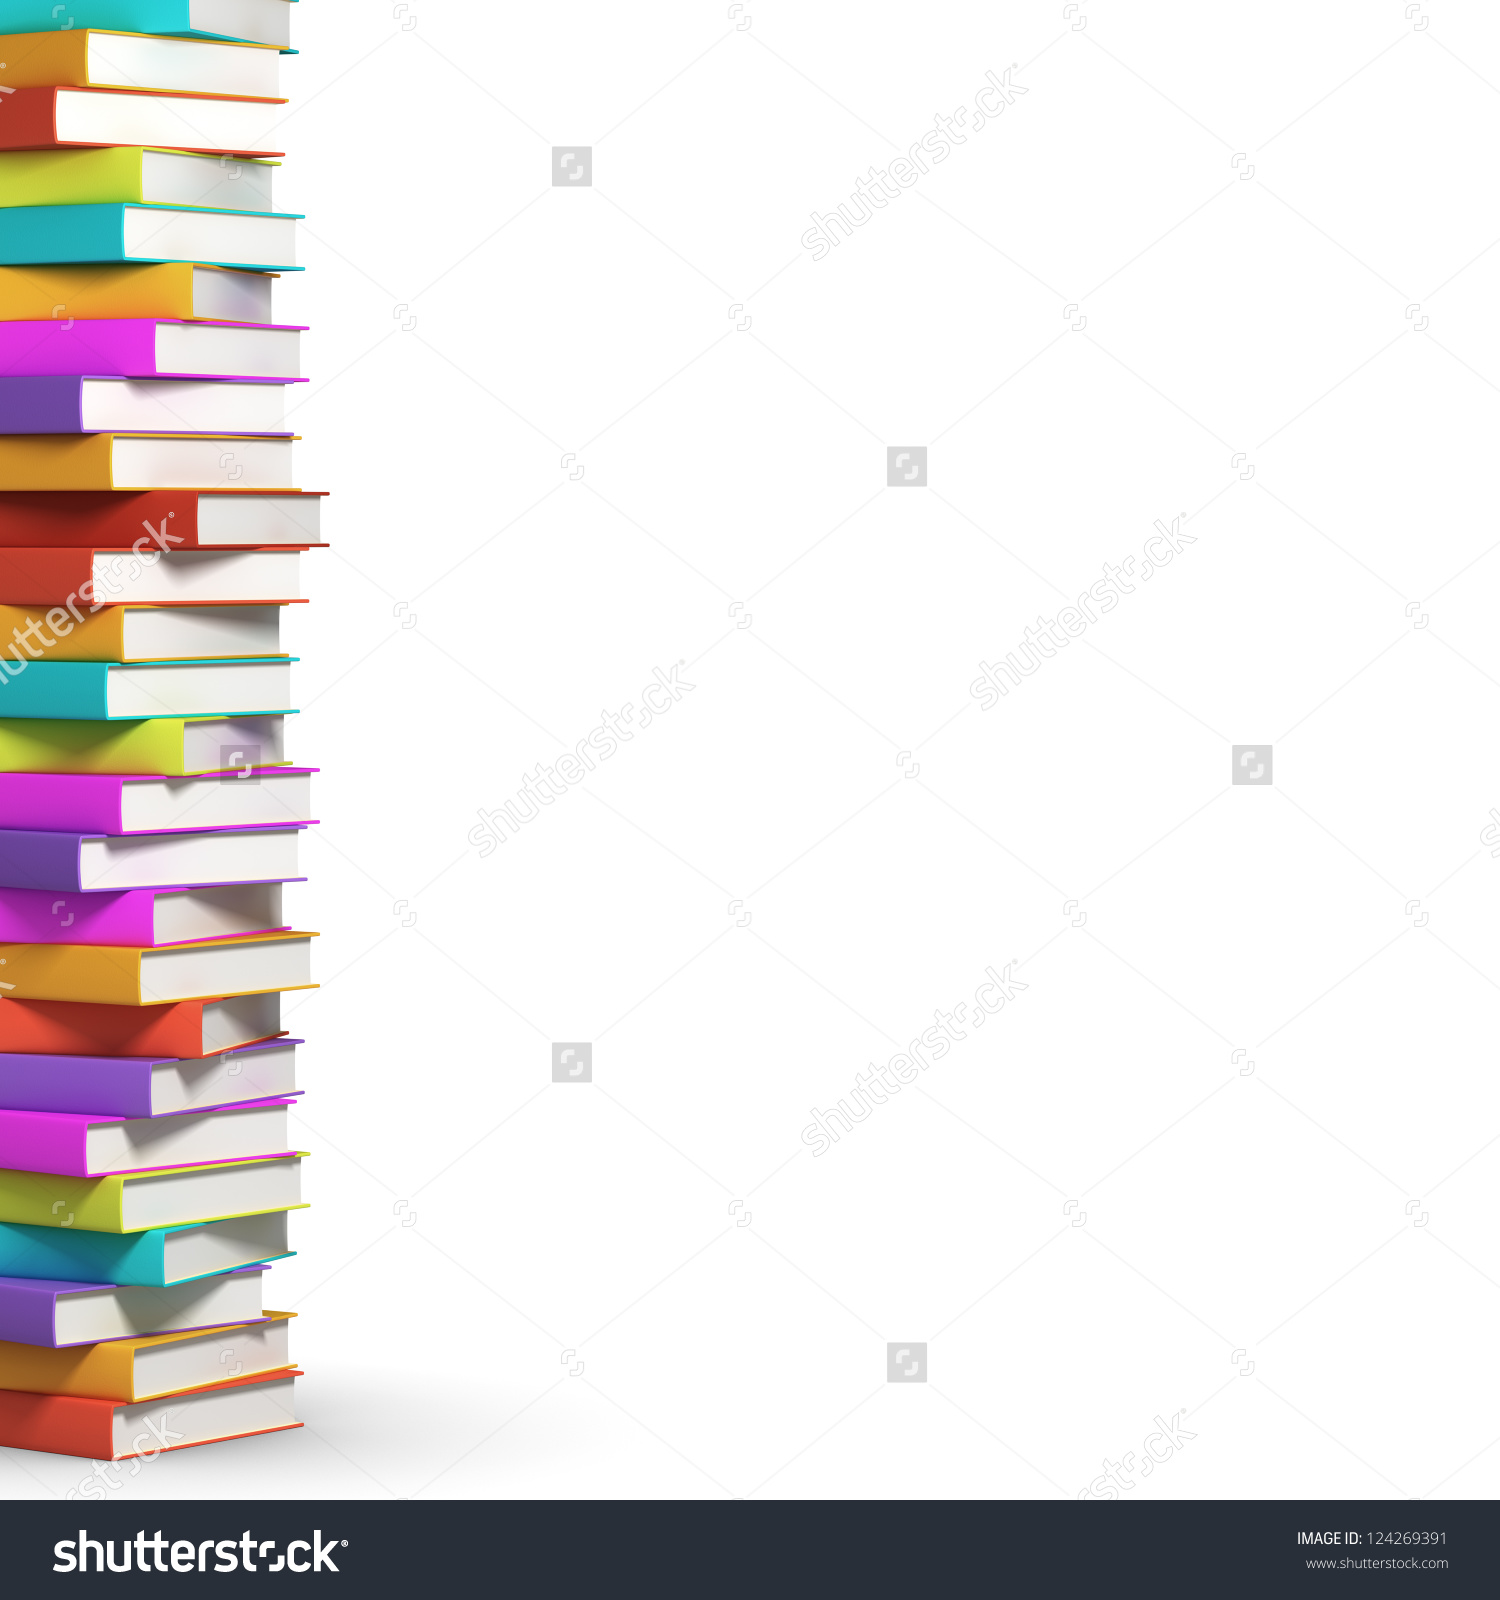 background images books #24